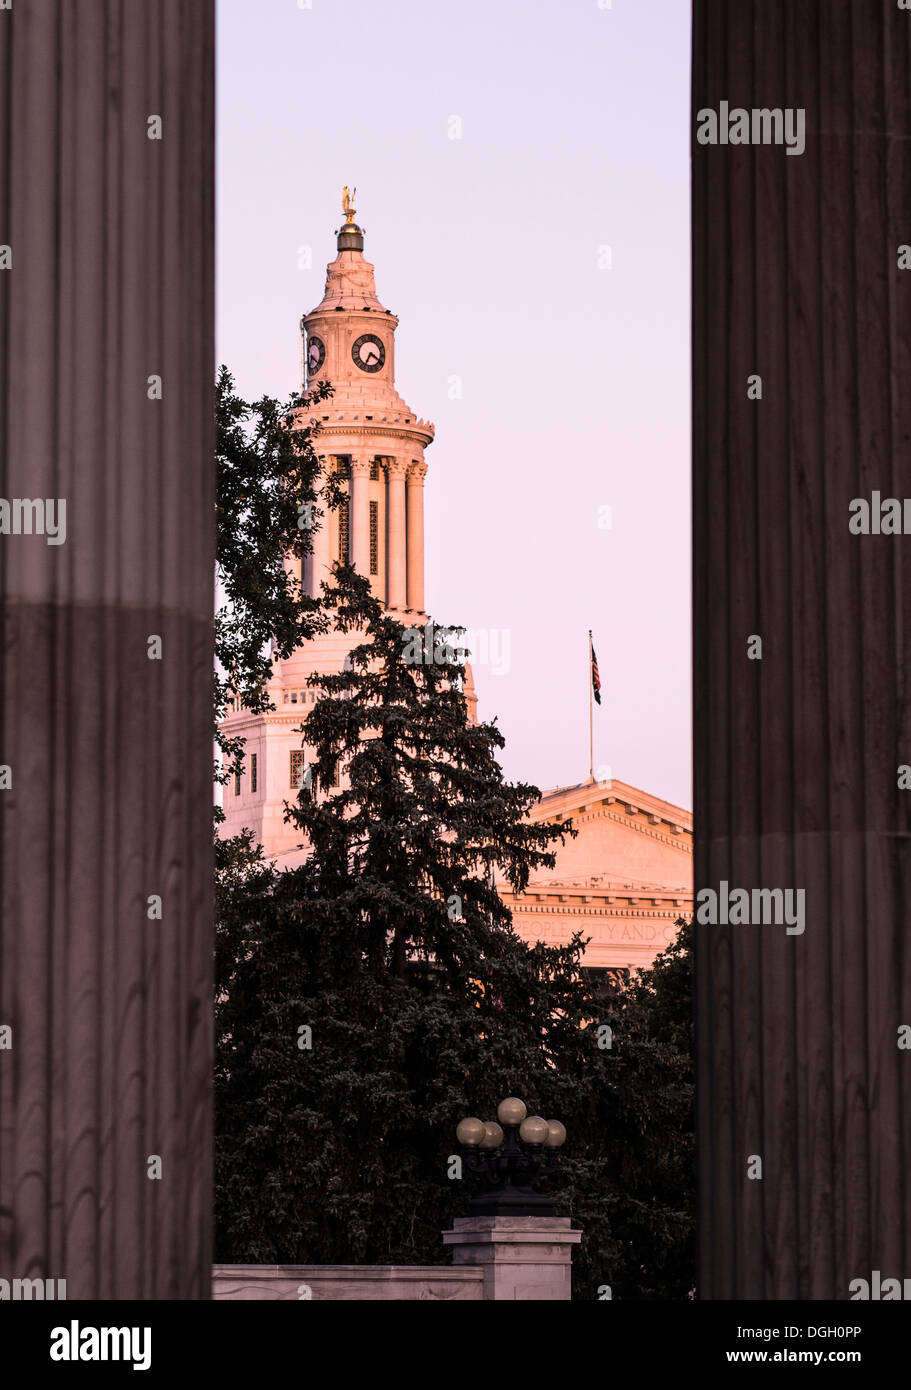 Clock tower of the Denver county building morning sun Stock Photo